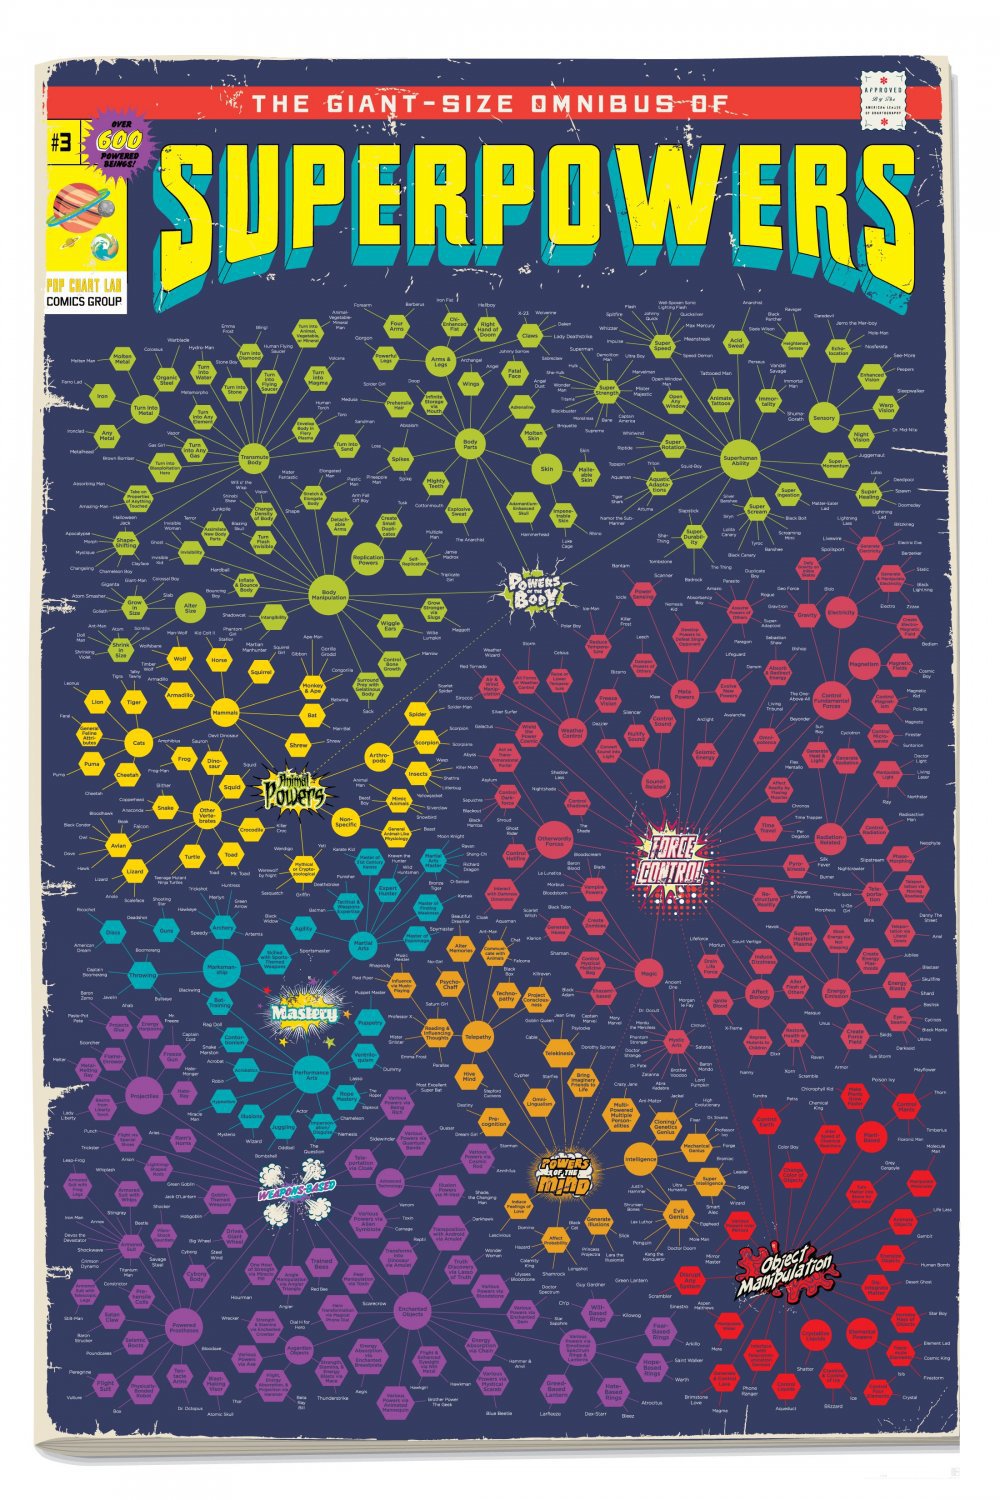 The Giant Size Omnibus of Superpowers Chart 13"x19" (32cm/49cm) Polyester Fabric Poster